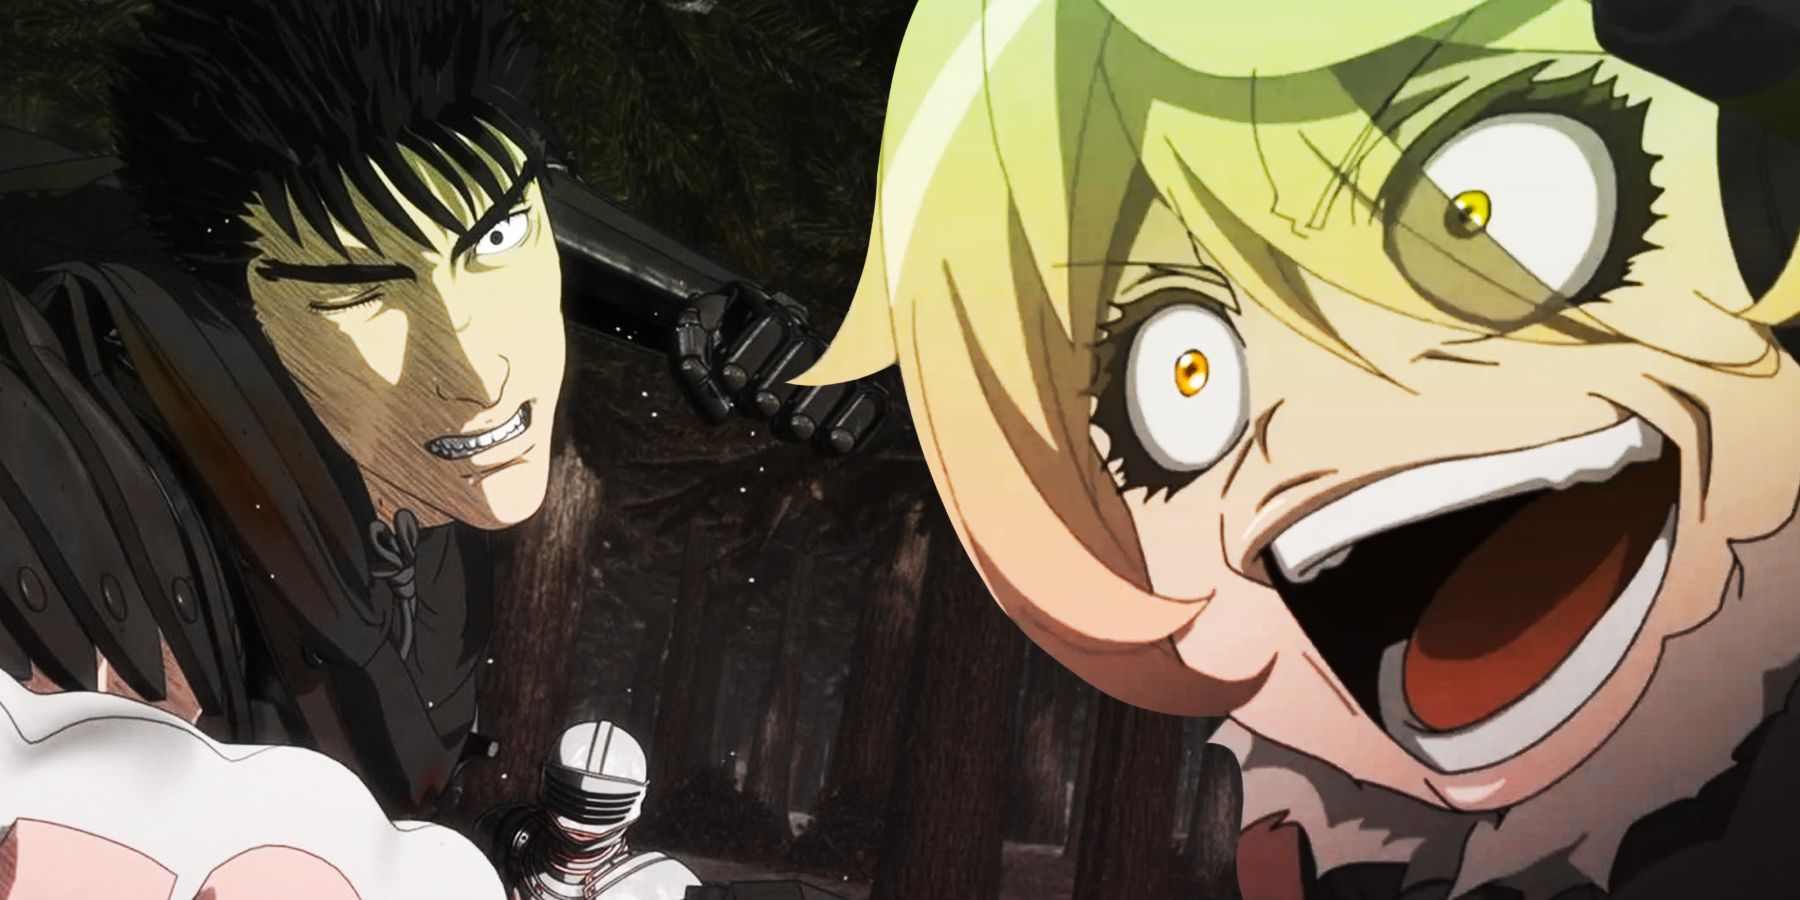 10 Best Anime Similar To Overlord, According To Ranker